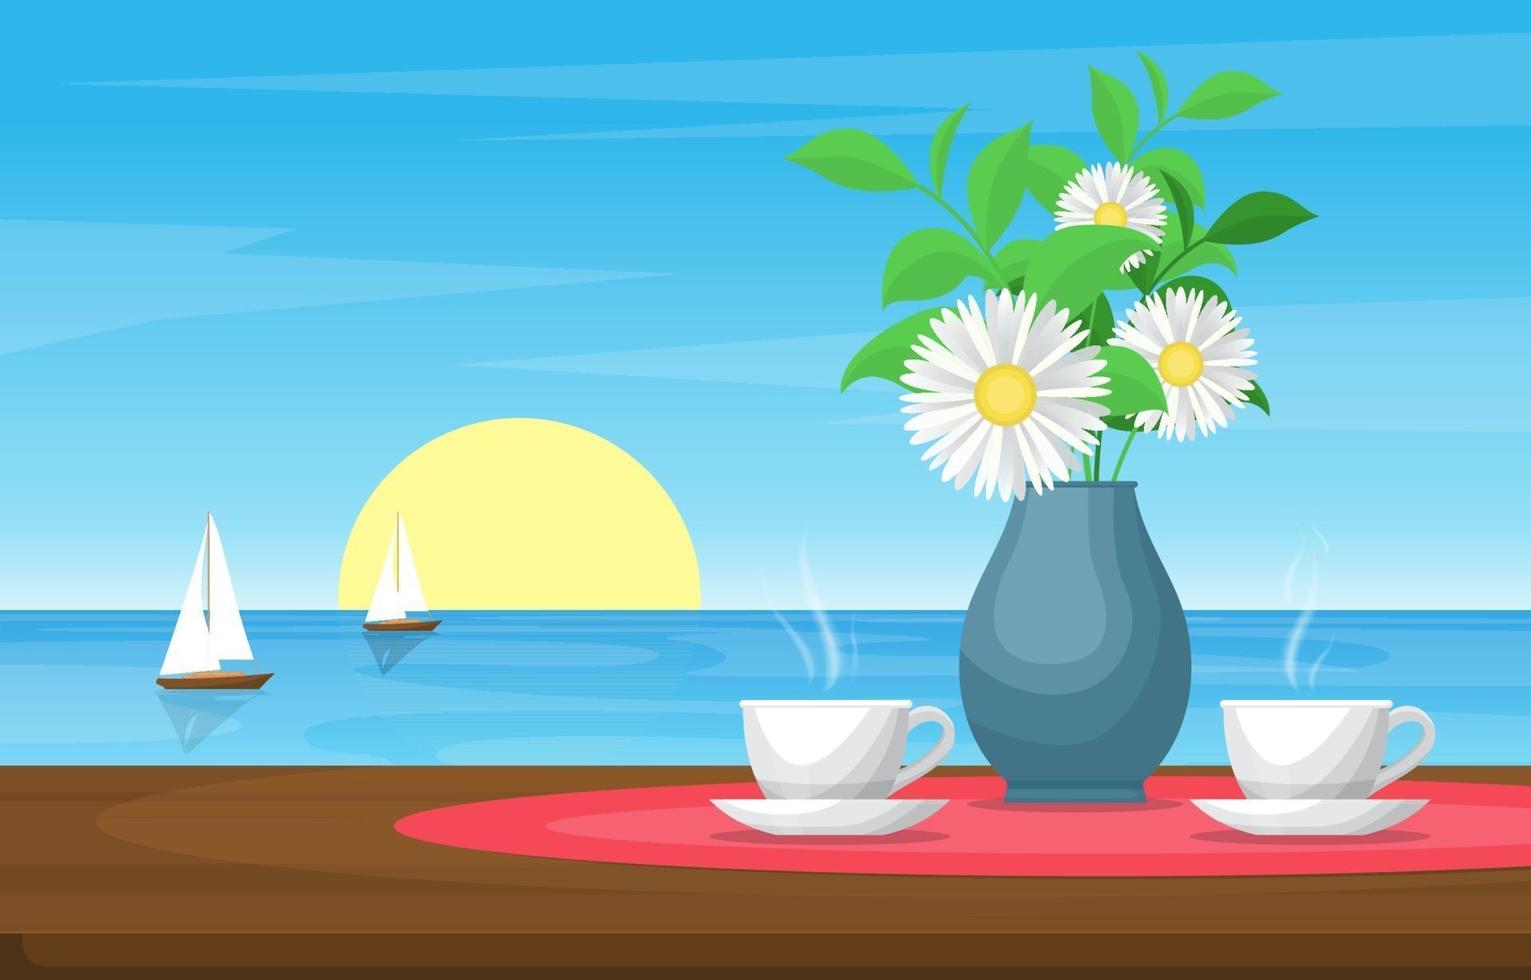 Cups of Tea and Flowers on Table with View of Ocean and Sailboats vector